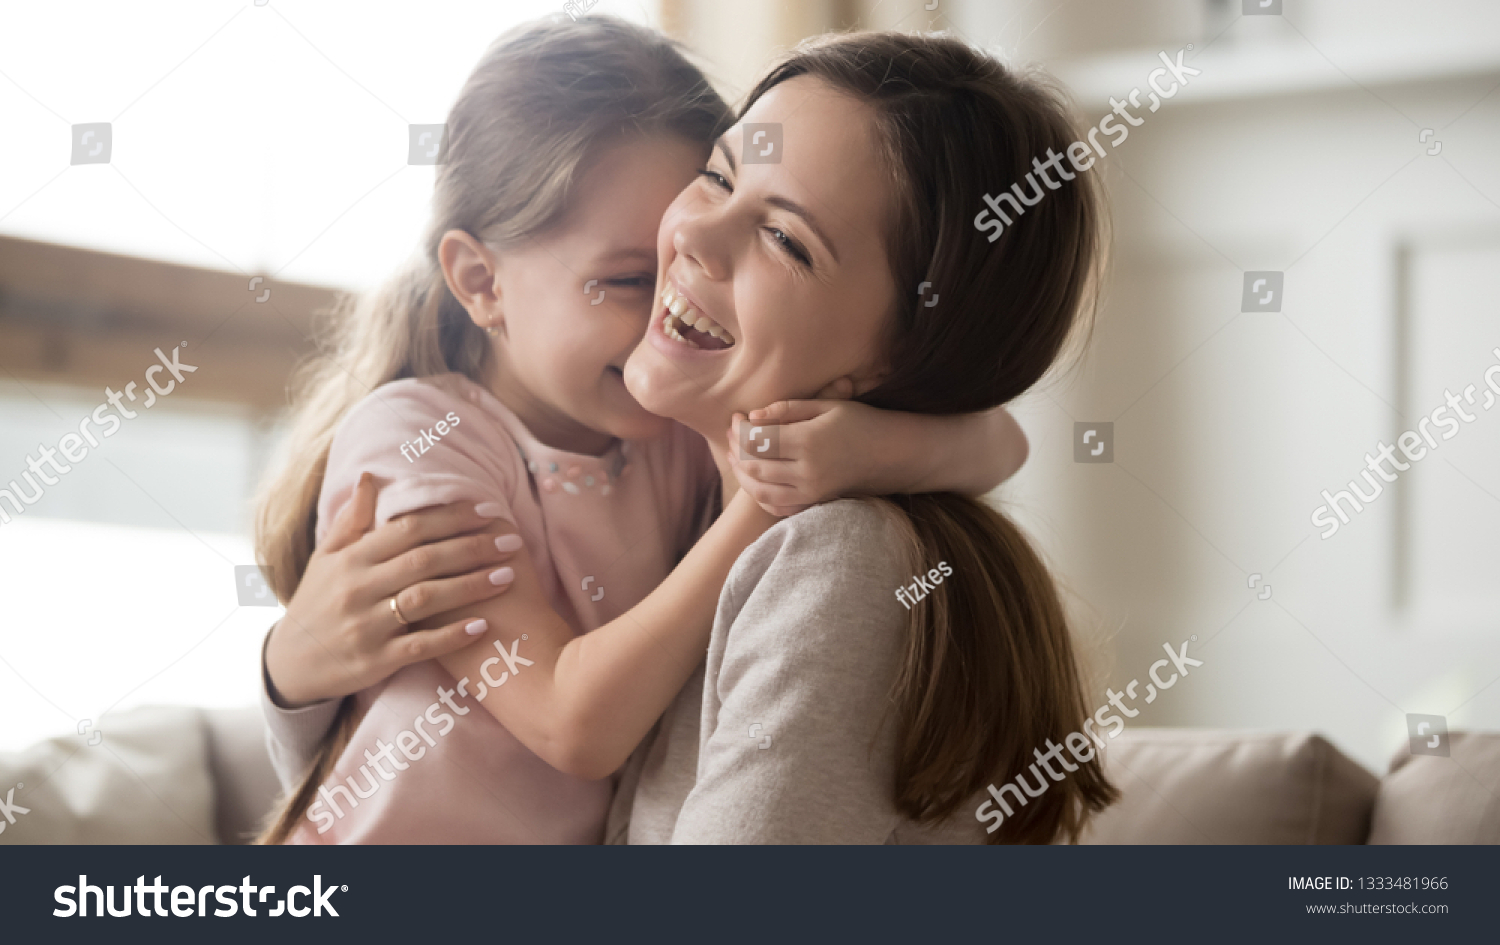 Loving young mother laughing embracing smiling cute funny kid daughter enjoying time together at home, happy family single mom with little child girl having fun playing feel joy cuddling and hugging #1333481966